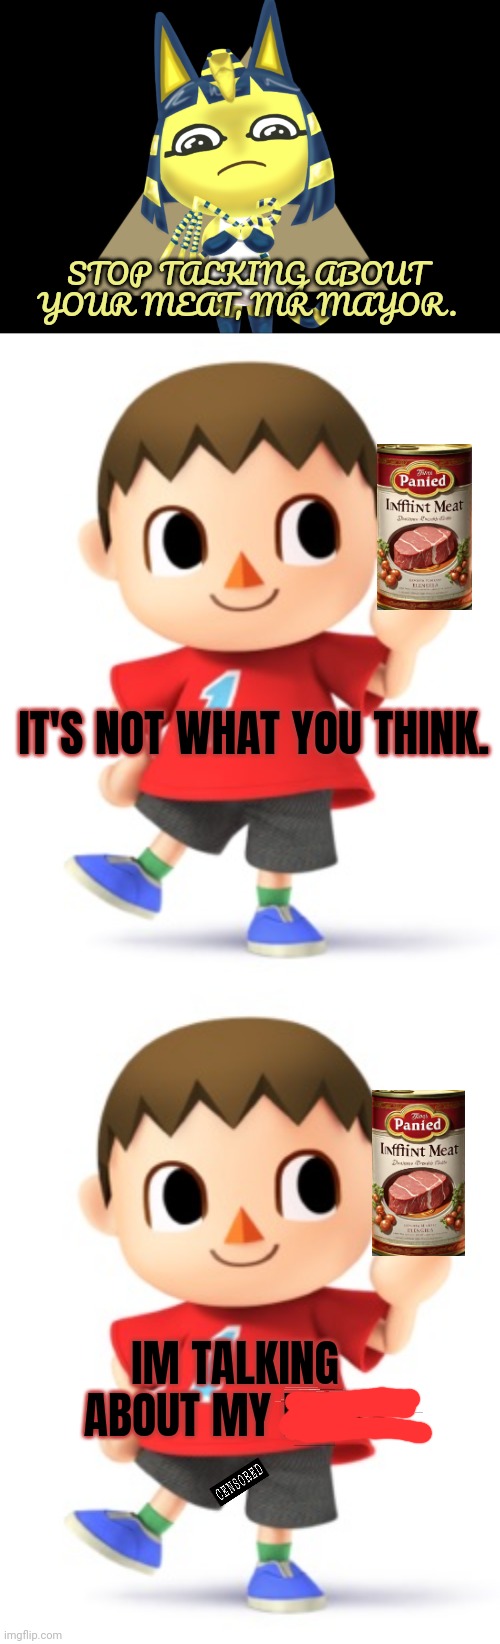 STOP TALKING ABOUT YOUR MEAT, MR MAYOR. IT'S NOT WHAT YOU THINK. IM TALKING ABOUT MY PENIS | image tagged in ankha's head band broke,animal crossing logic | made w/ Imgflip meme maker